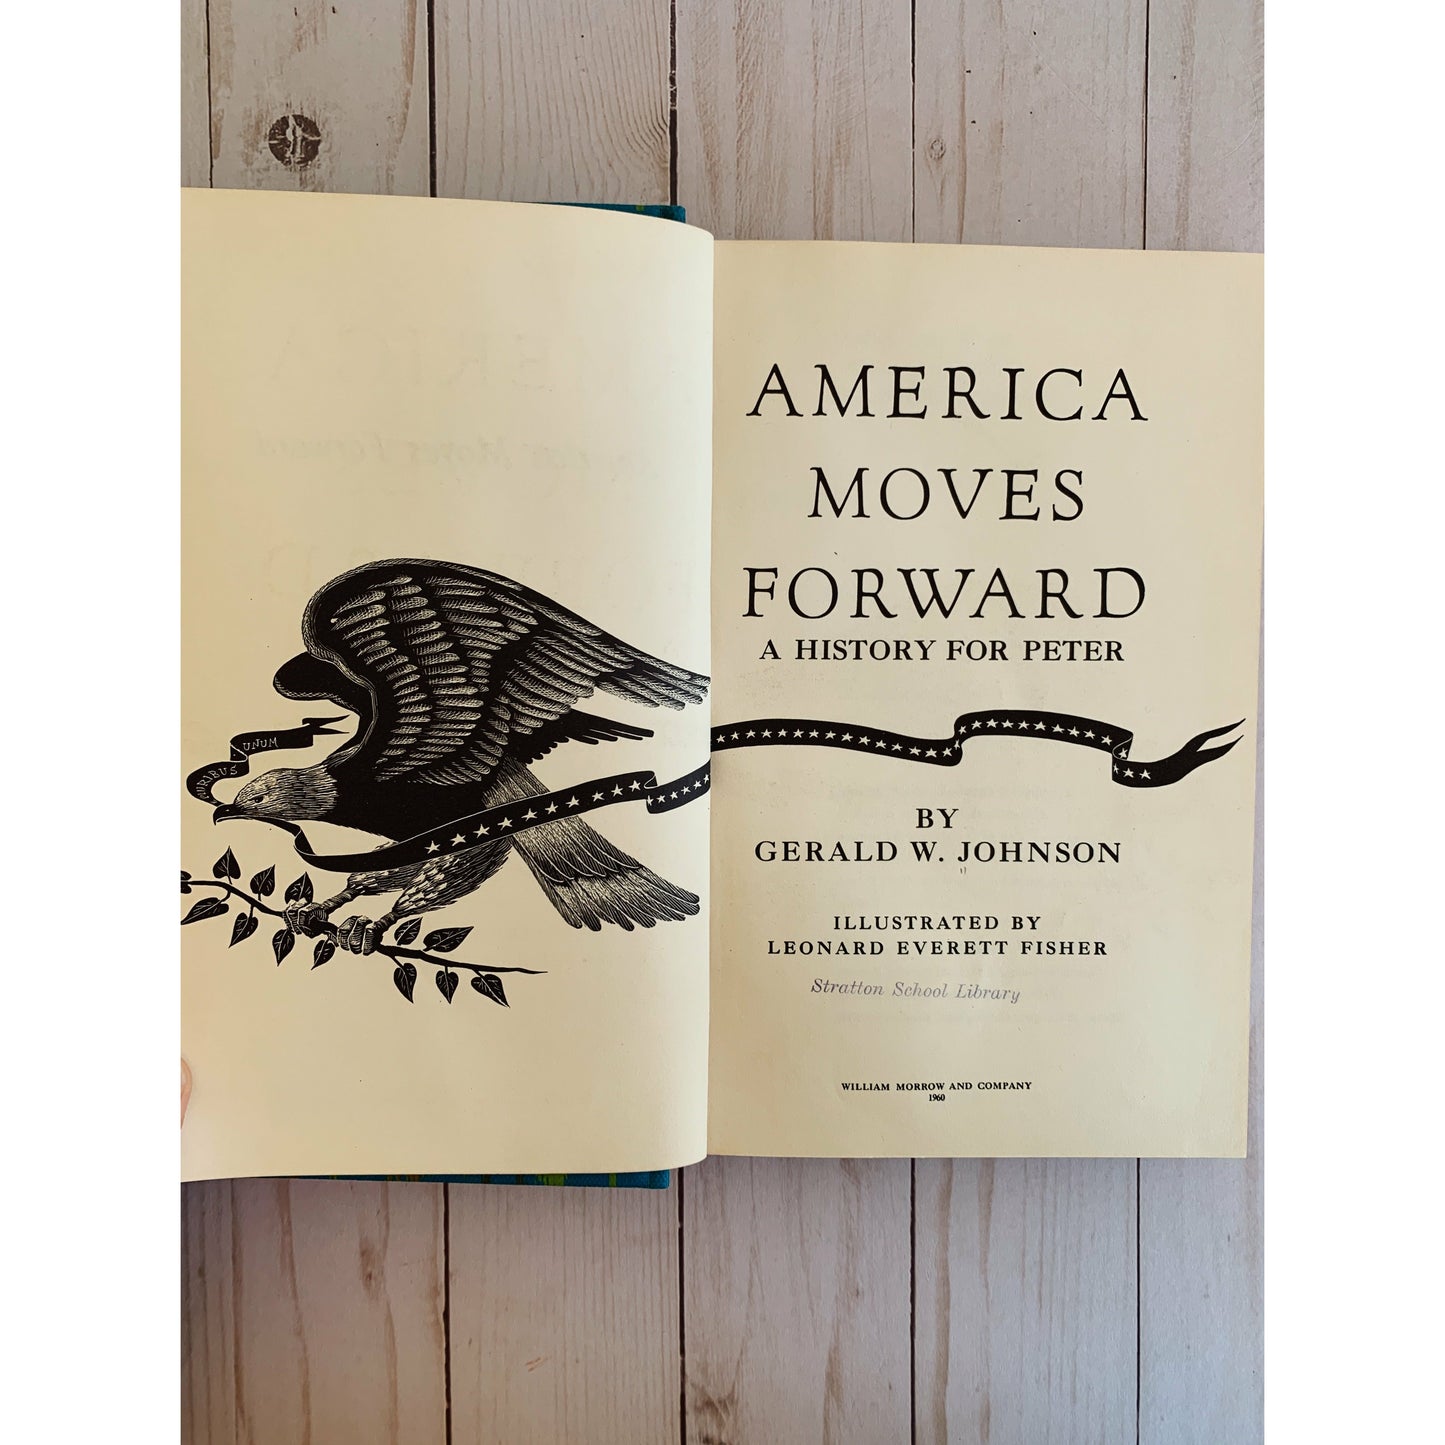 America Moves Forward: A History for Peter 1960 Hardcover